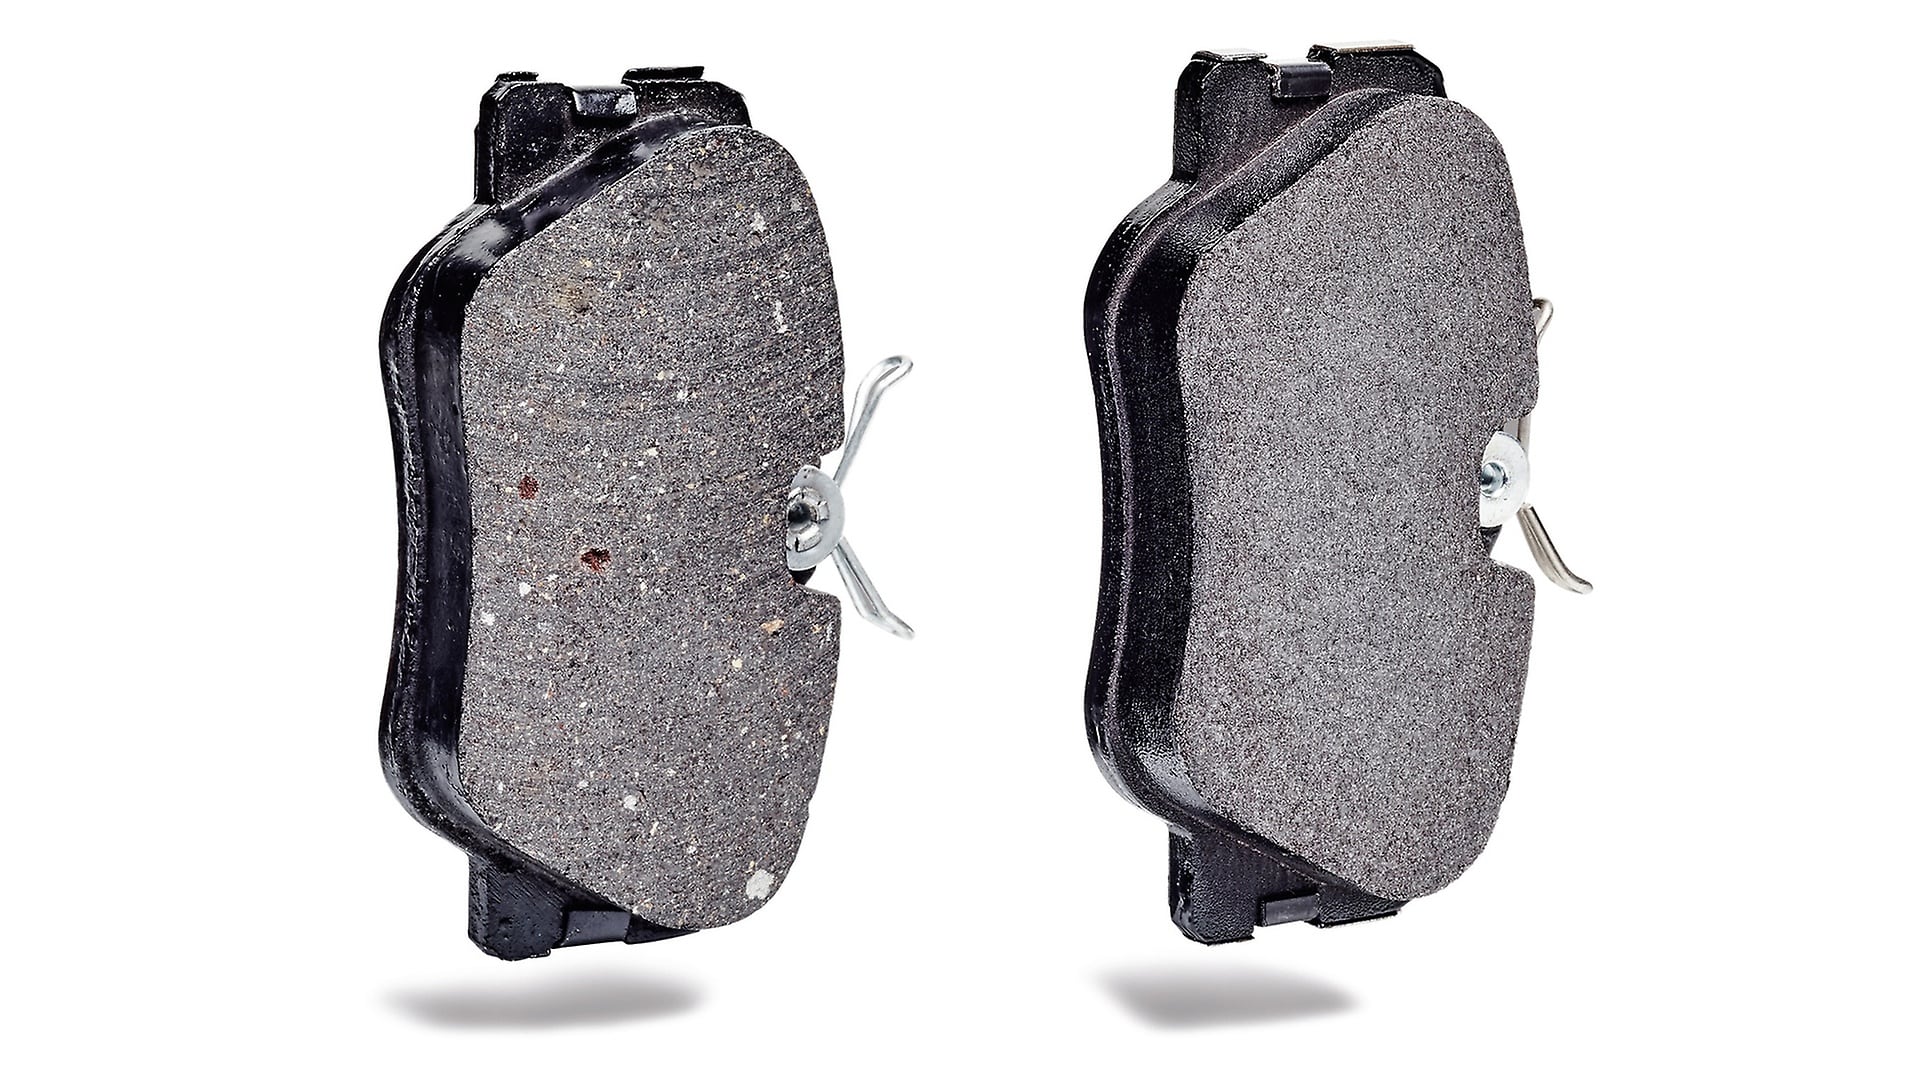 Brake pads after stress test: Counterfeit (left) and original (right).